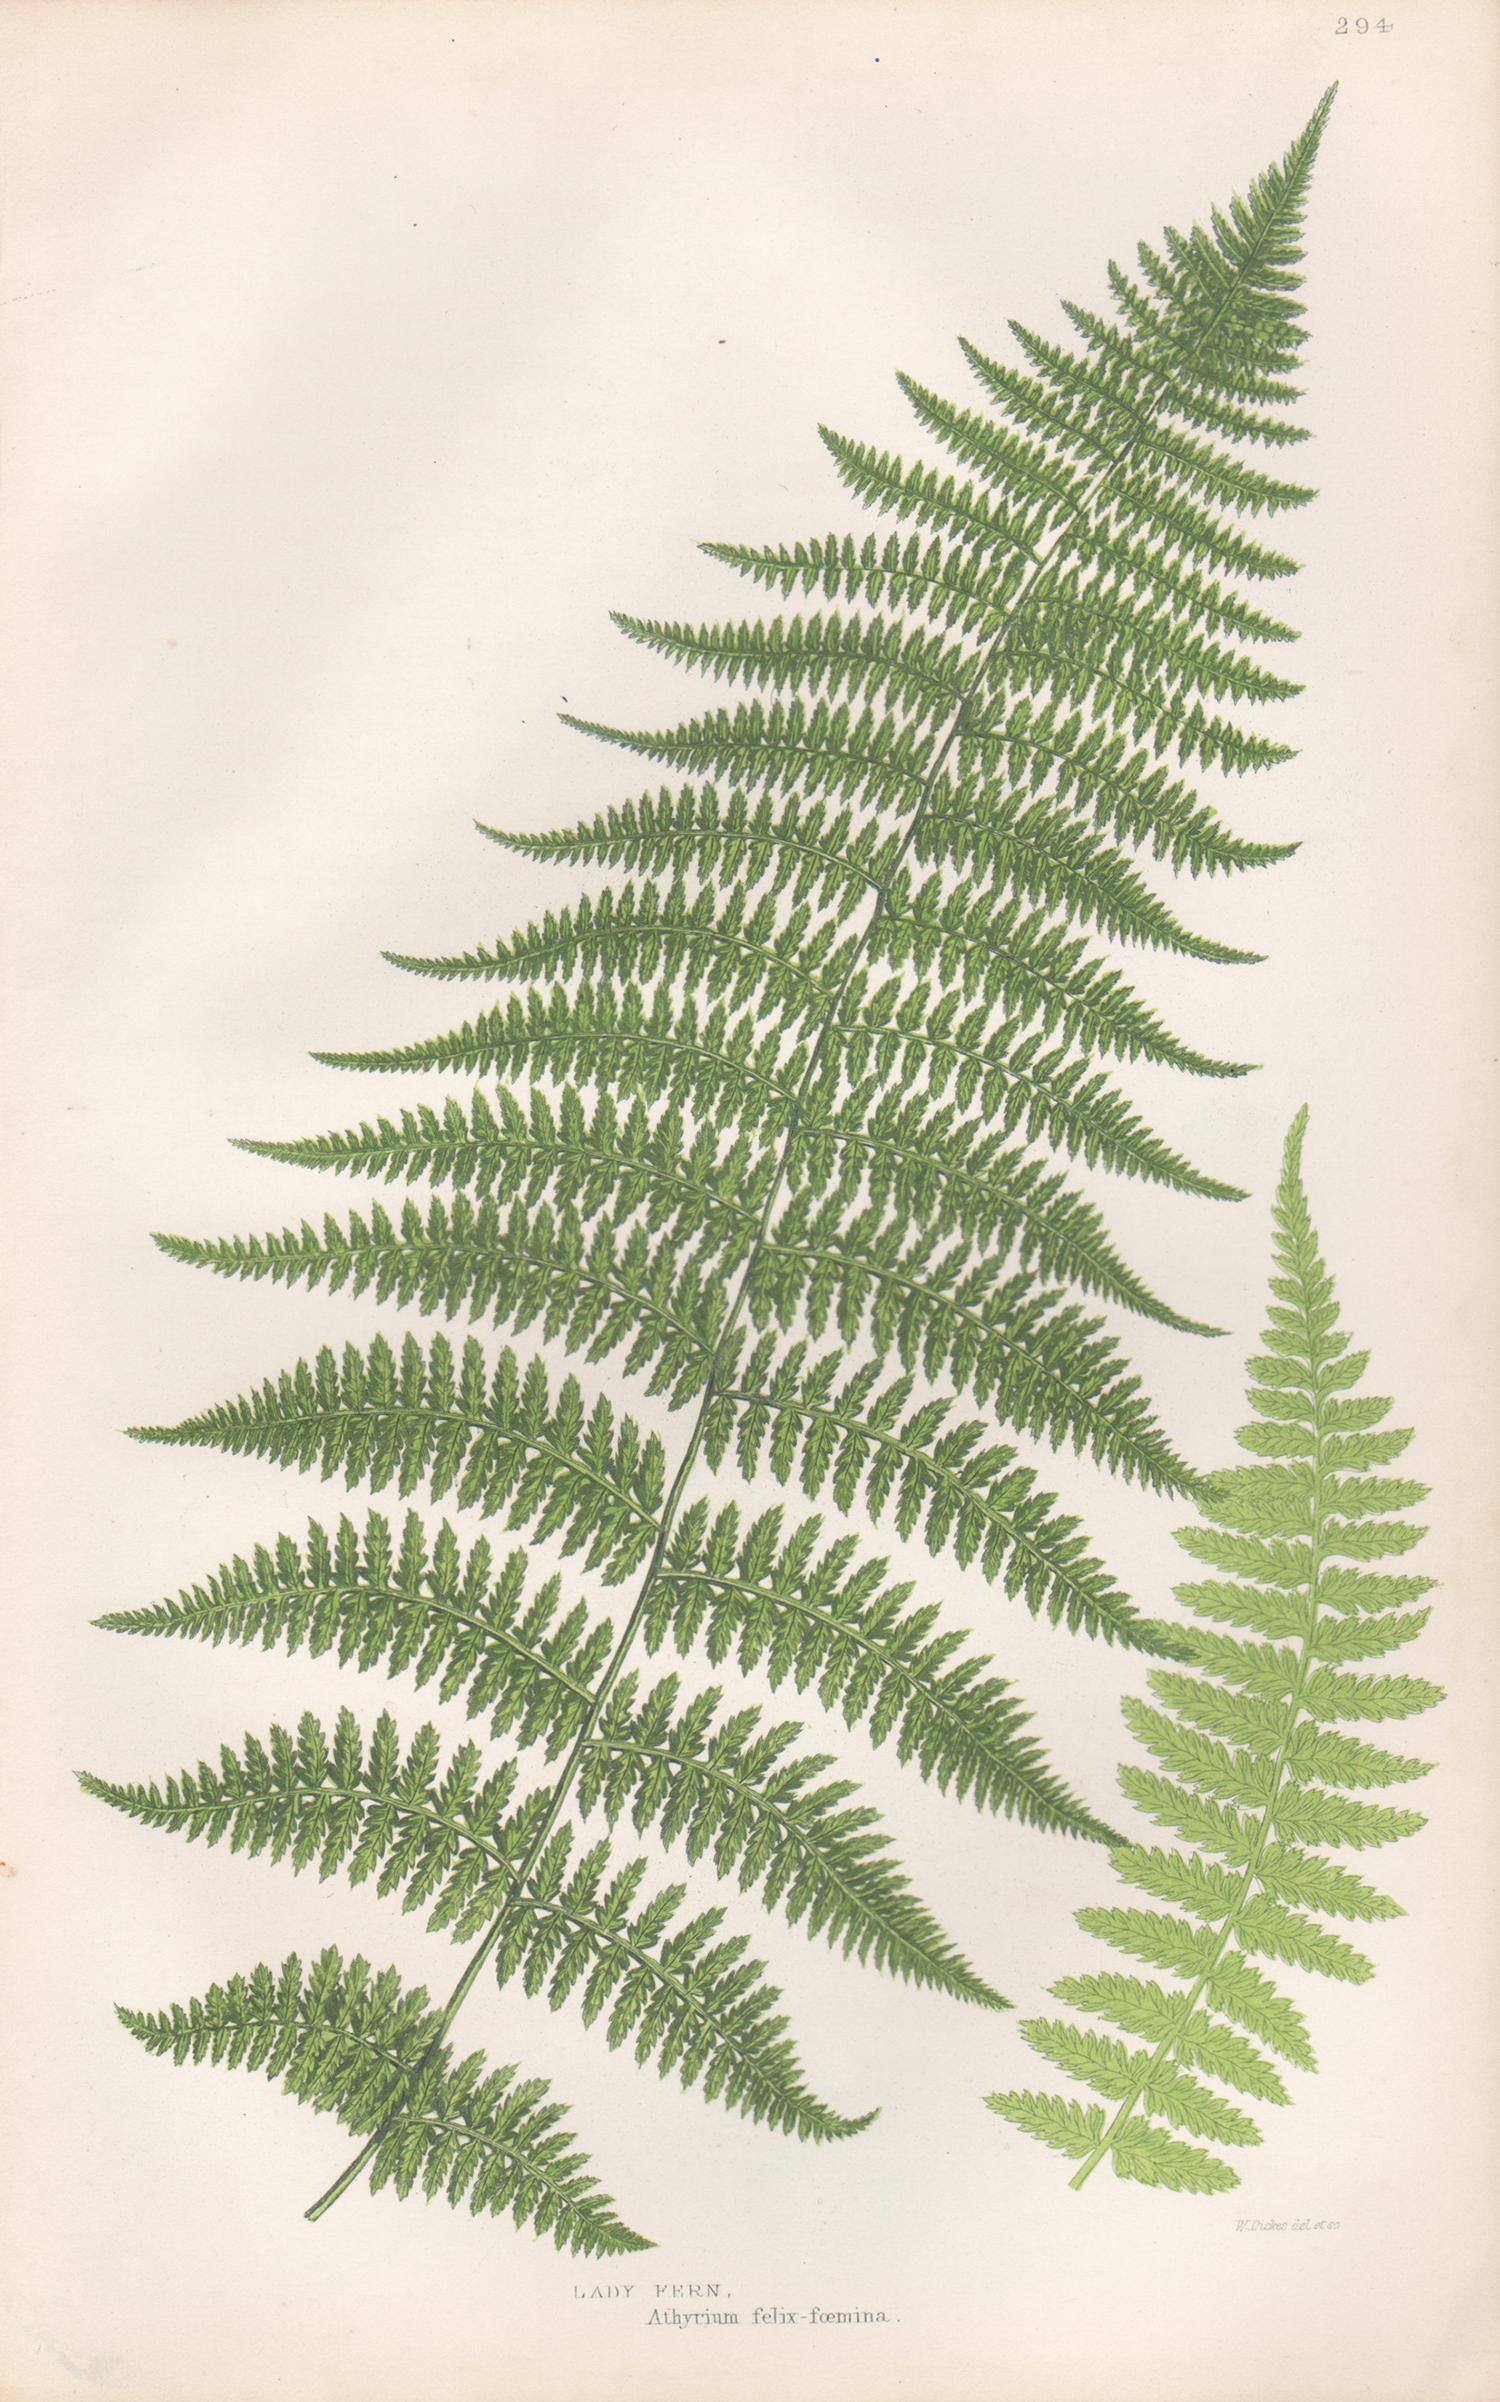 Ferns - Collection of 22 antique fern botanical woodblock prints 6